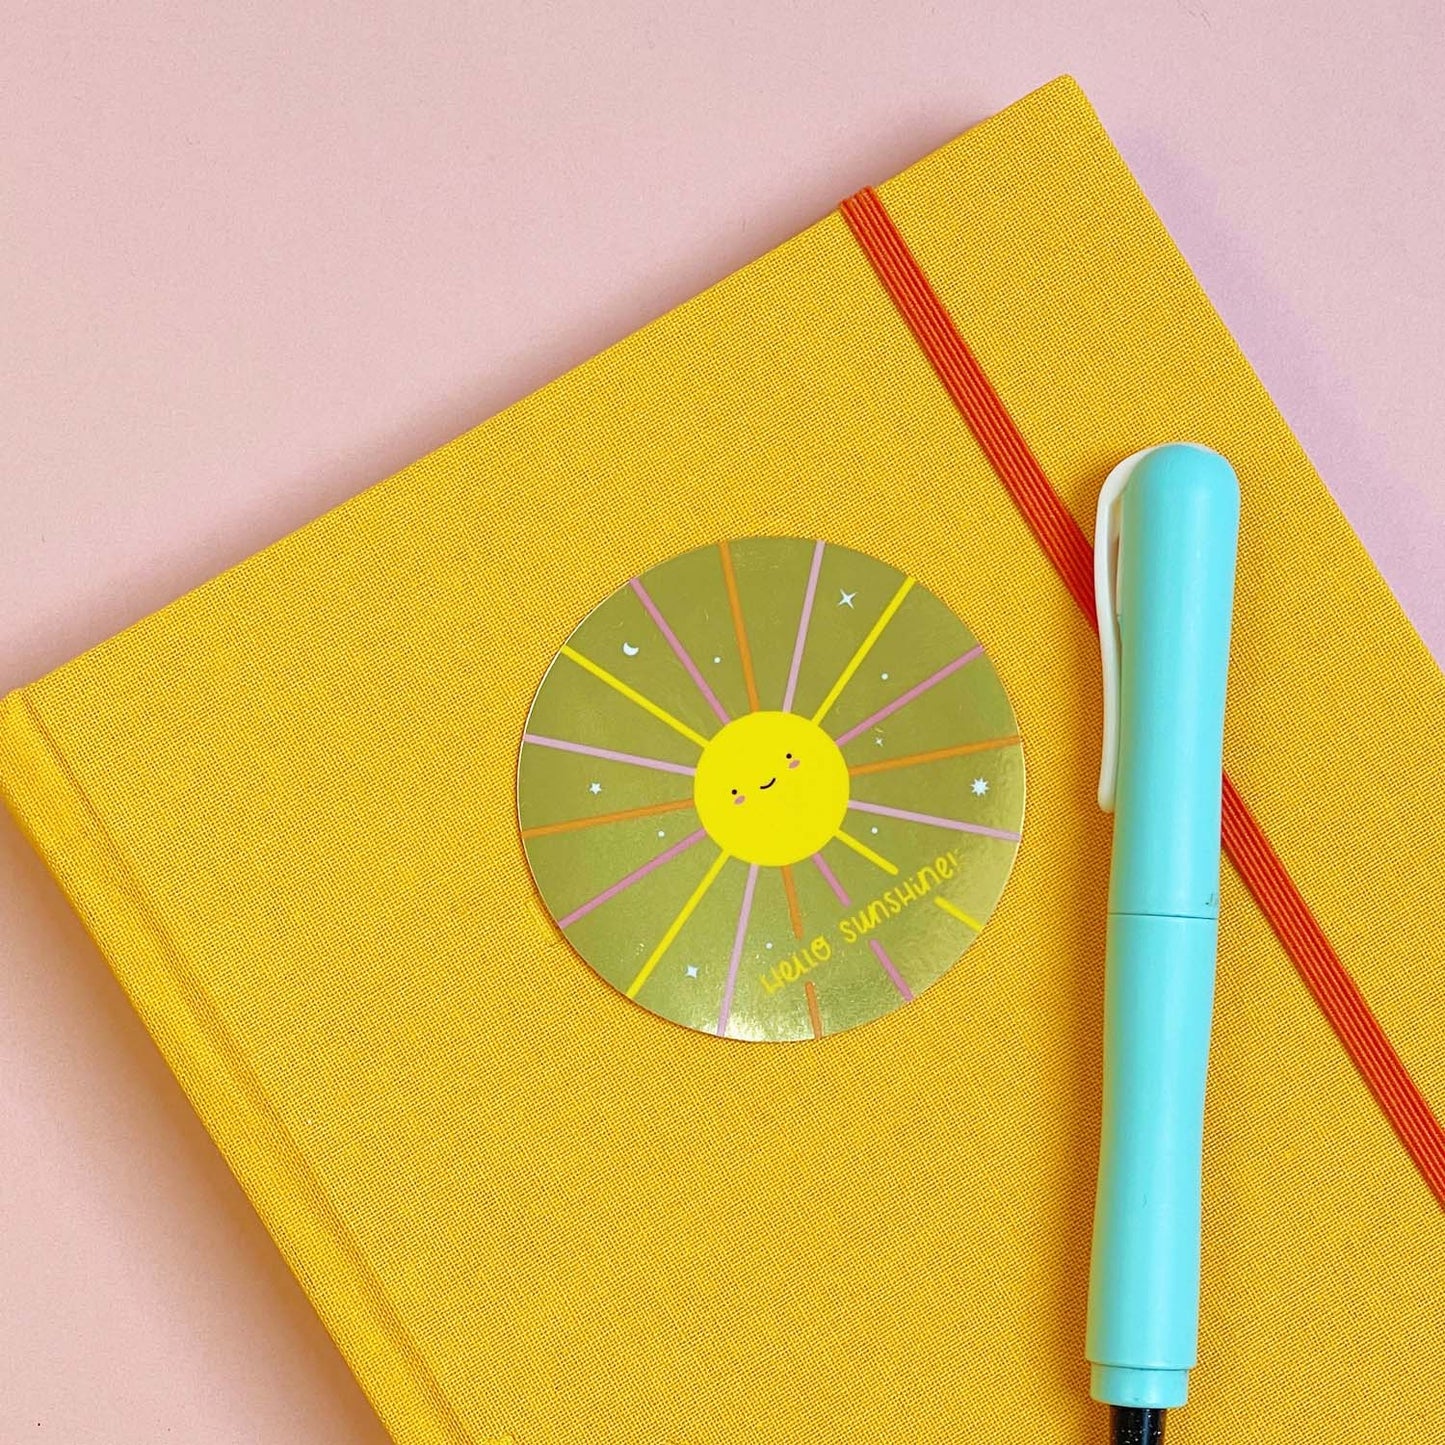 A shiny mirror effect gold sticker featuring a smiling sun lying on top of a yellow journal on a pink background